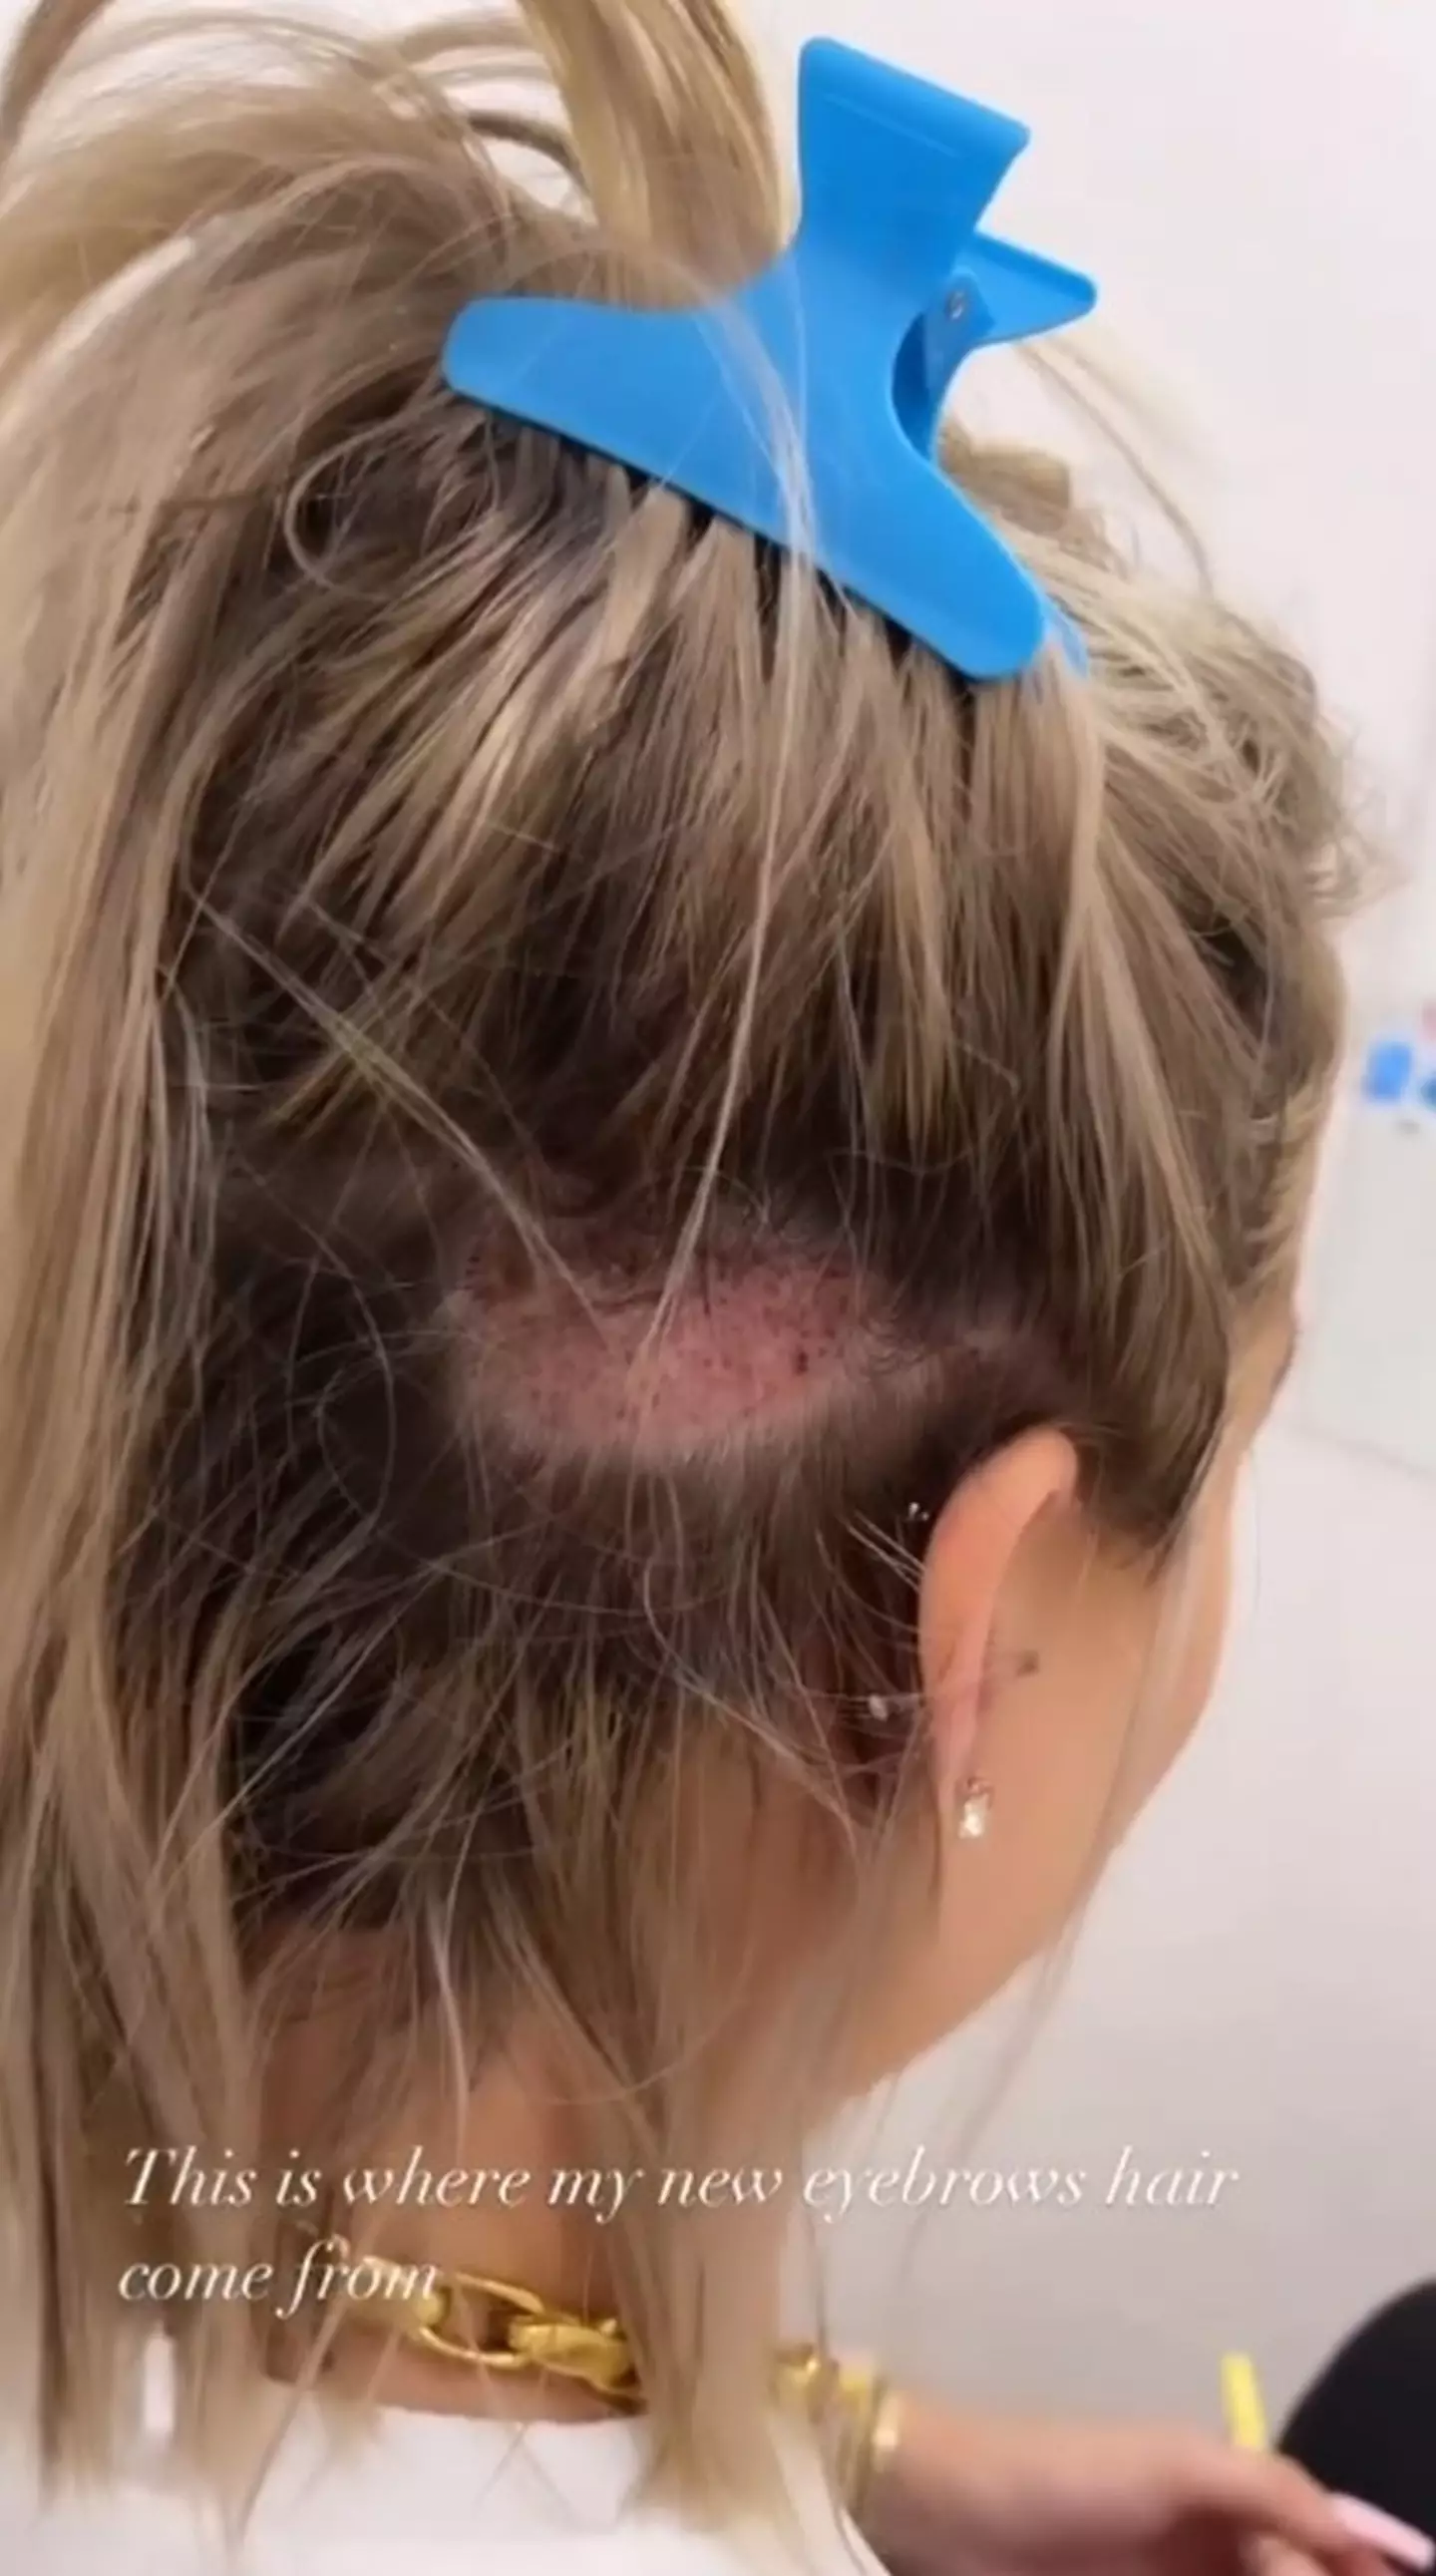 Hair follicles were taken from the back of Isabelle's head.